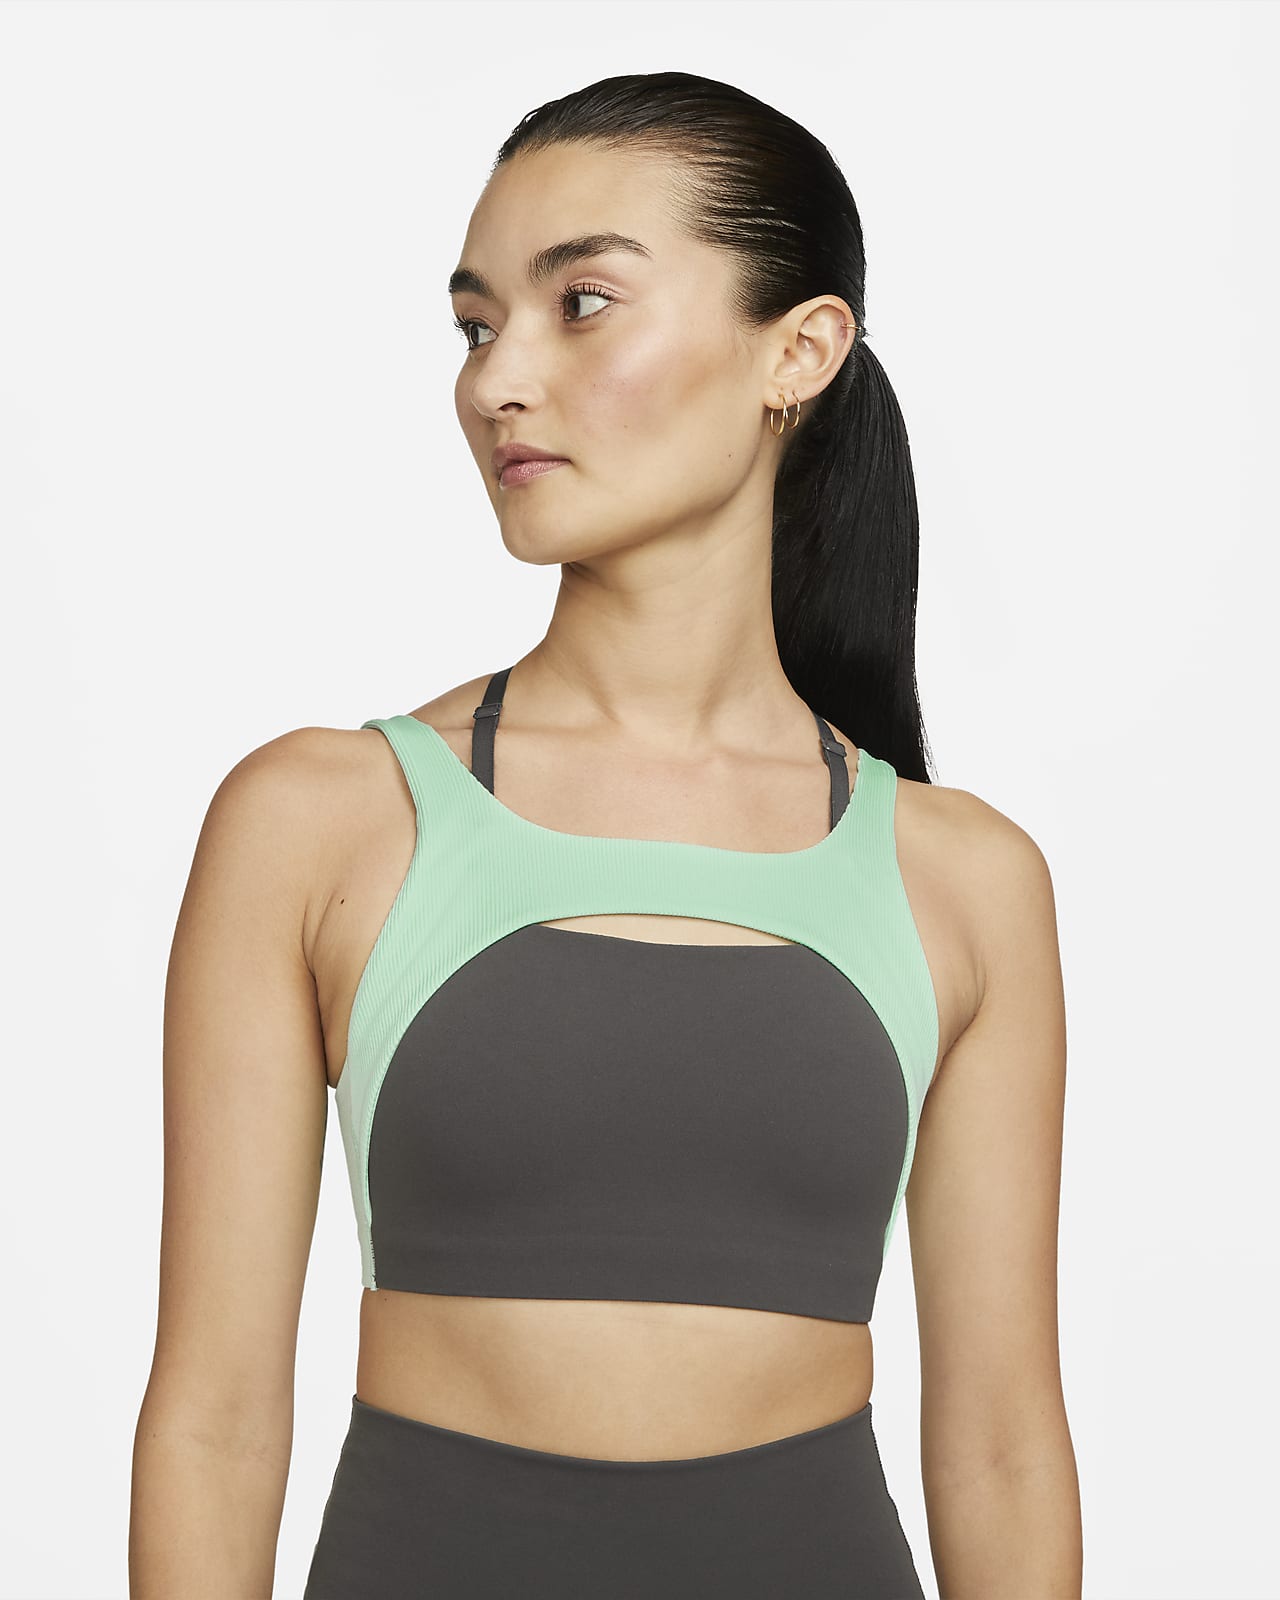 Nike Training Nike Yoga Indy light support layered sports bra in